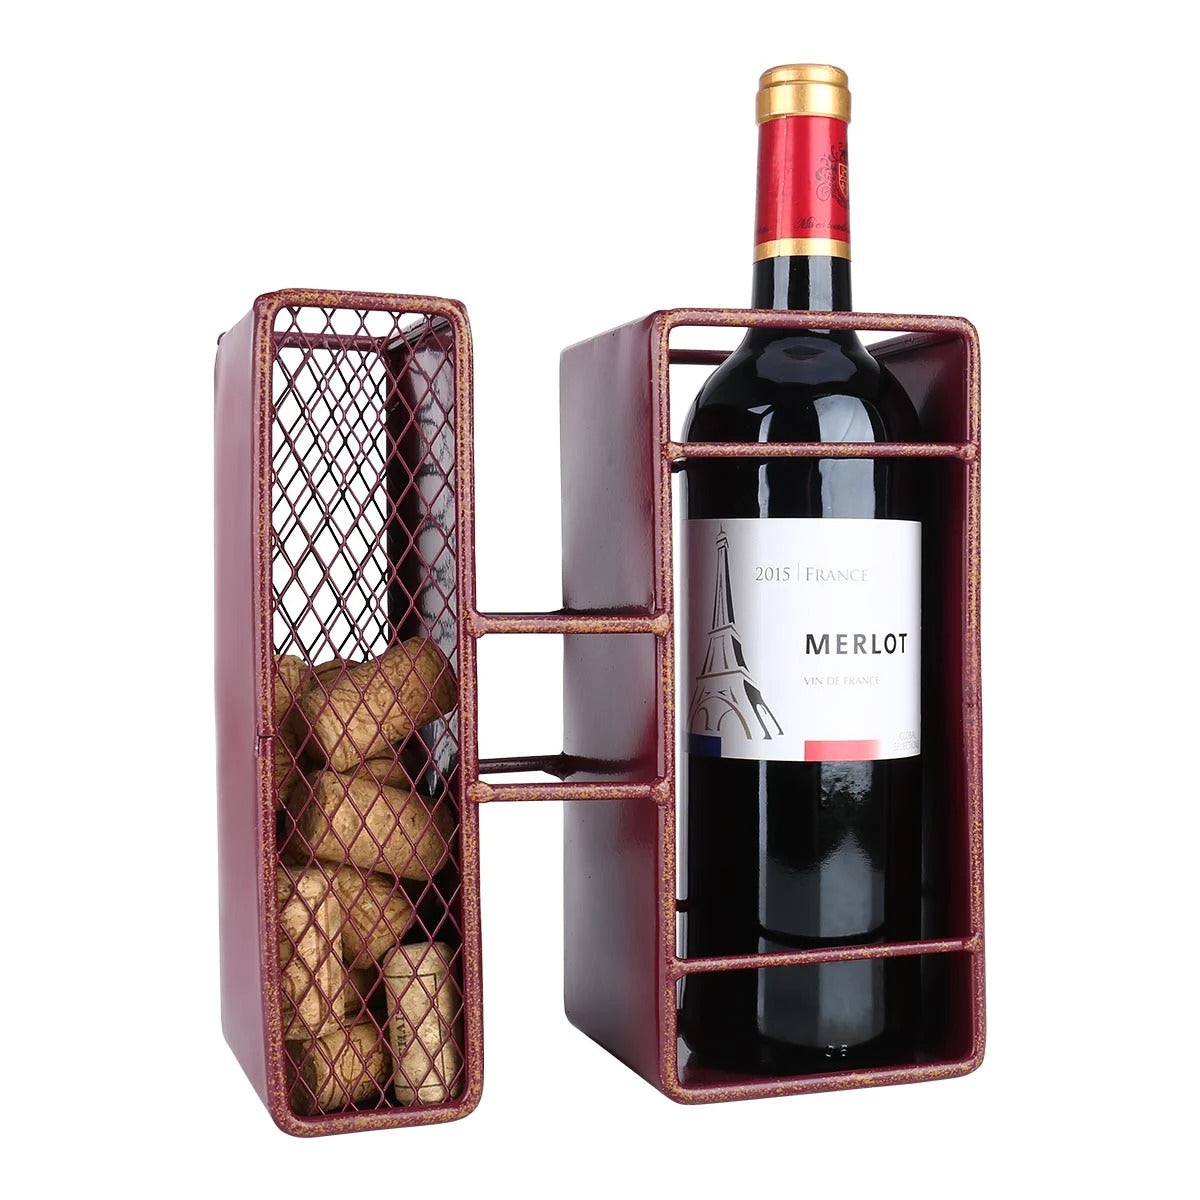 Decorative Letters wine bottle-cork holder is a great item to Housewarming Gifts